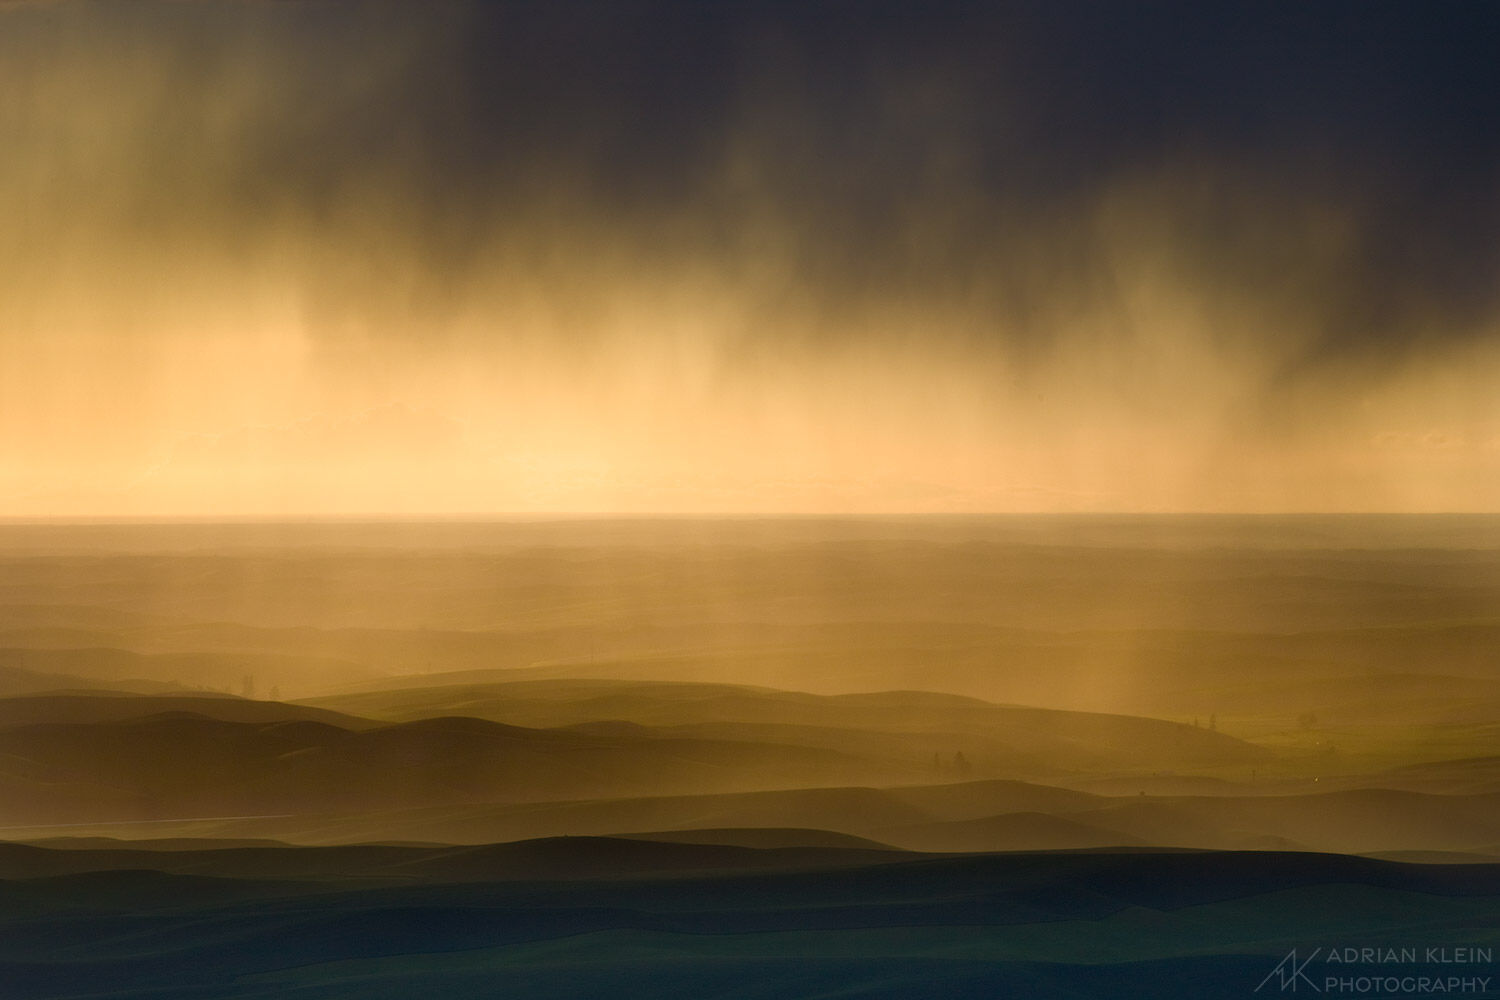 A quick low hanging storm rolls through the Palouse Hills at sunset.